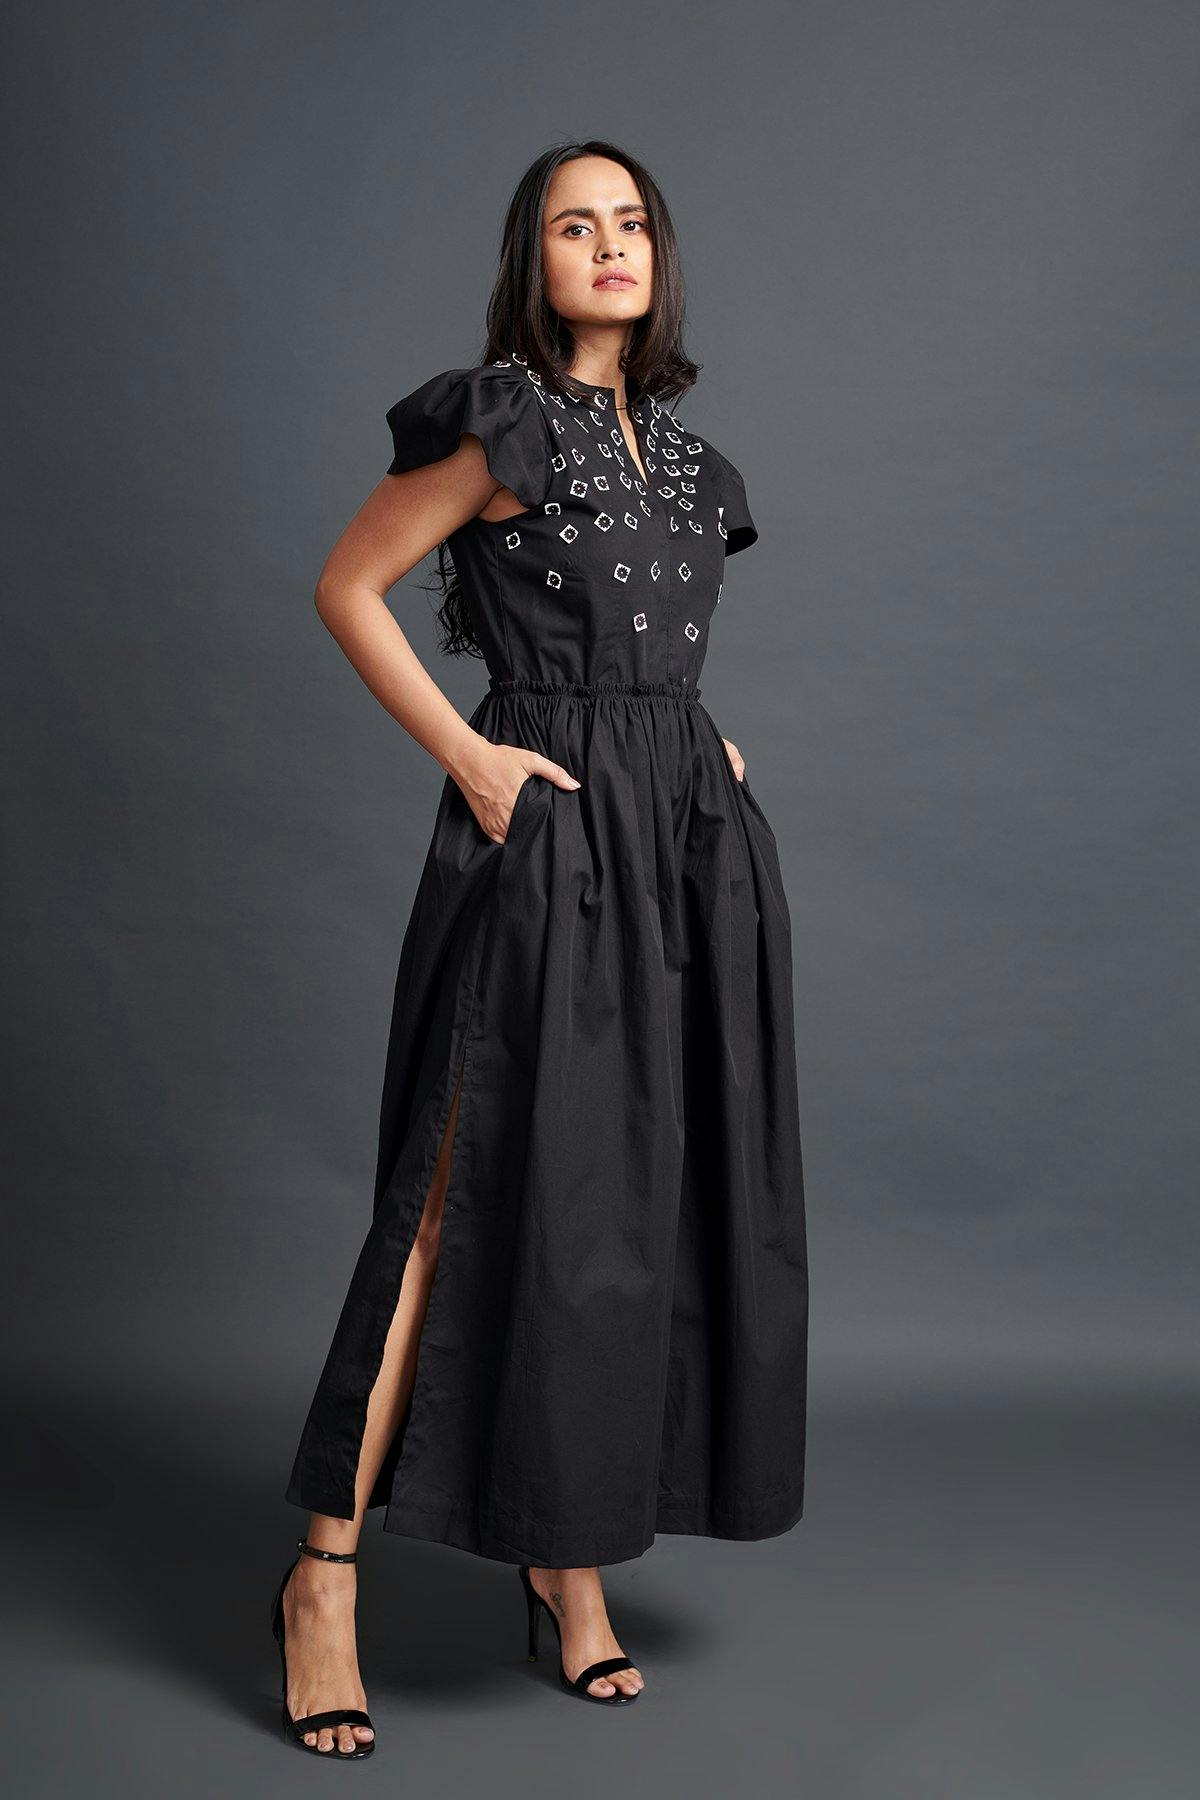 Black jumpsuit with embroidery, a product by Deepika Arora